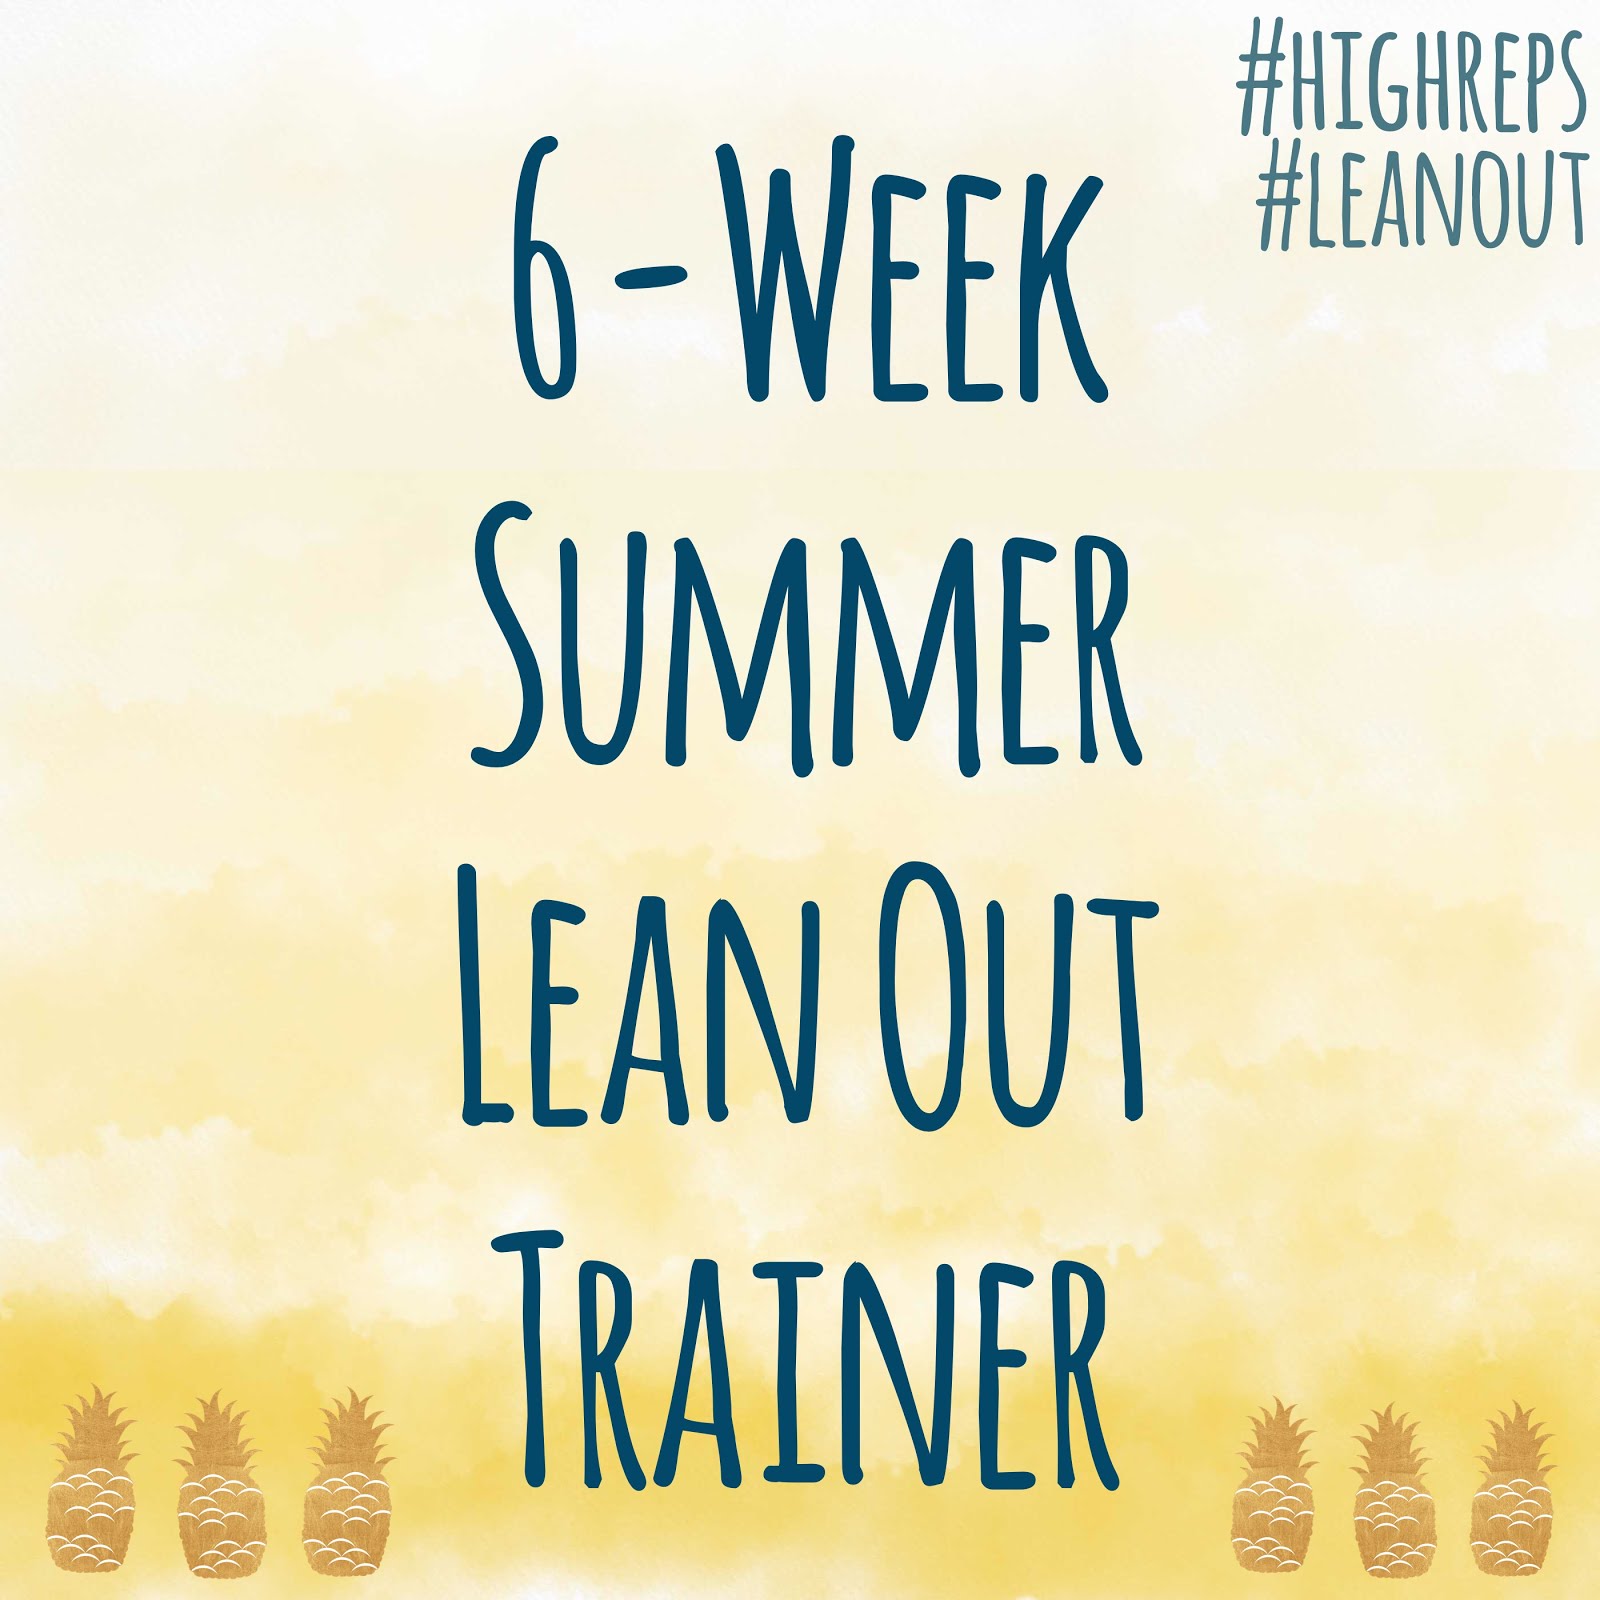 6-Week Summer Lean Out Trainer